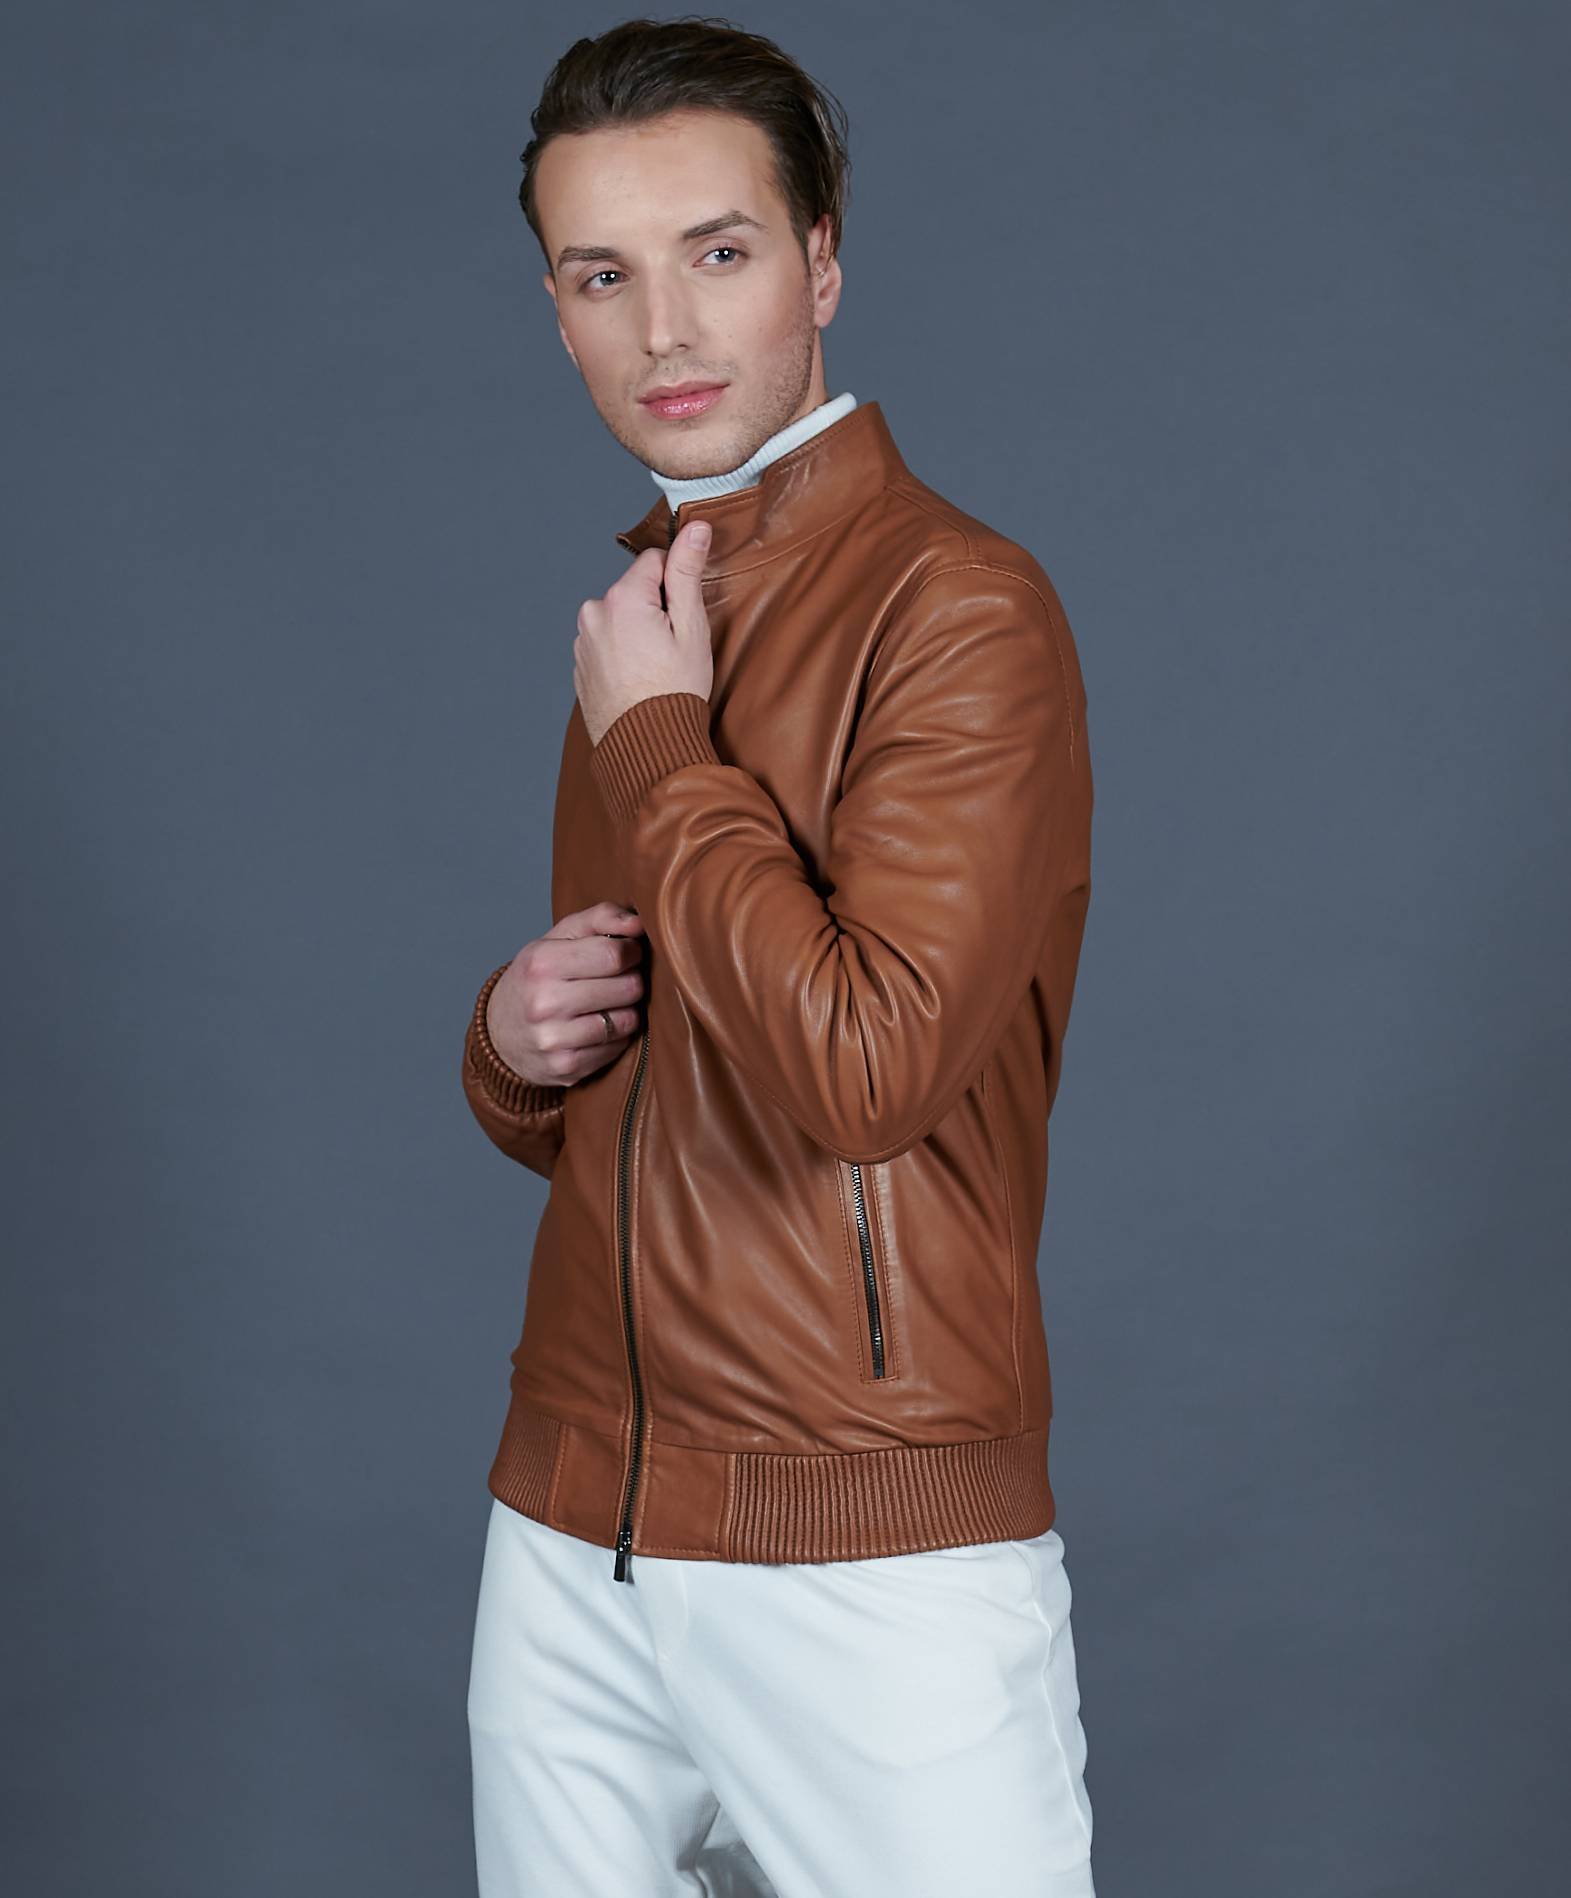 Bomber jacket in tan leather with canne embroidery